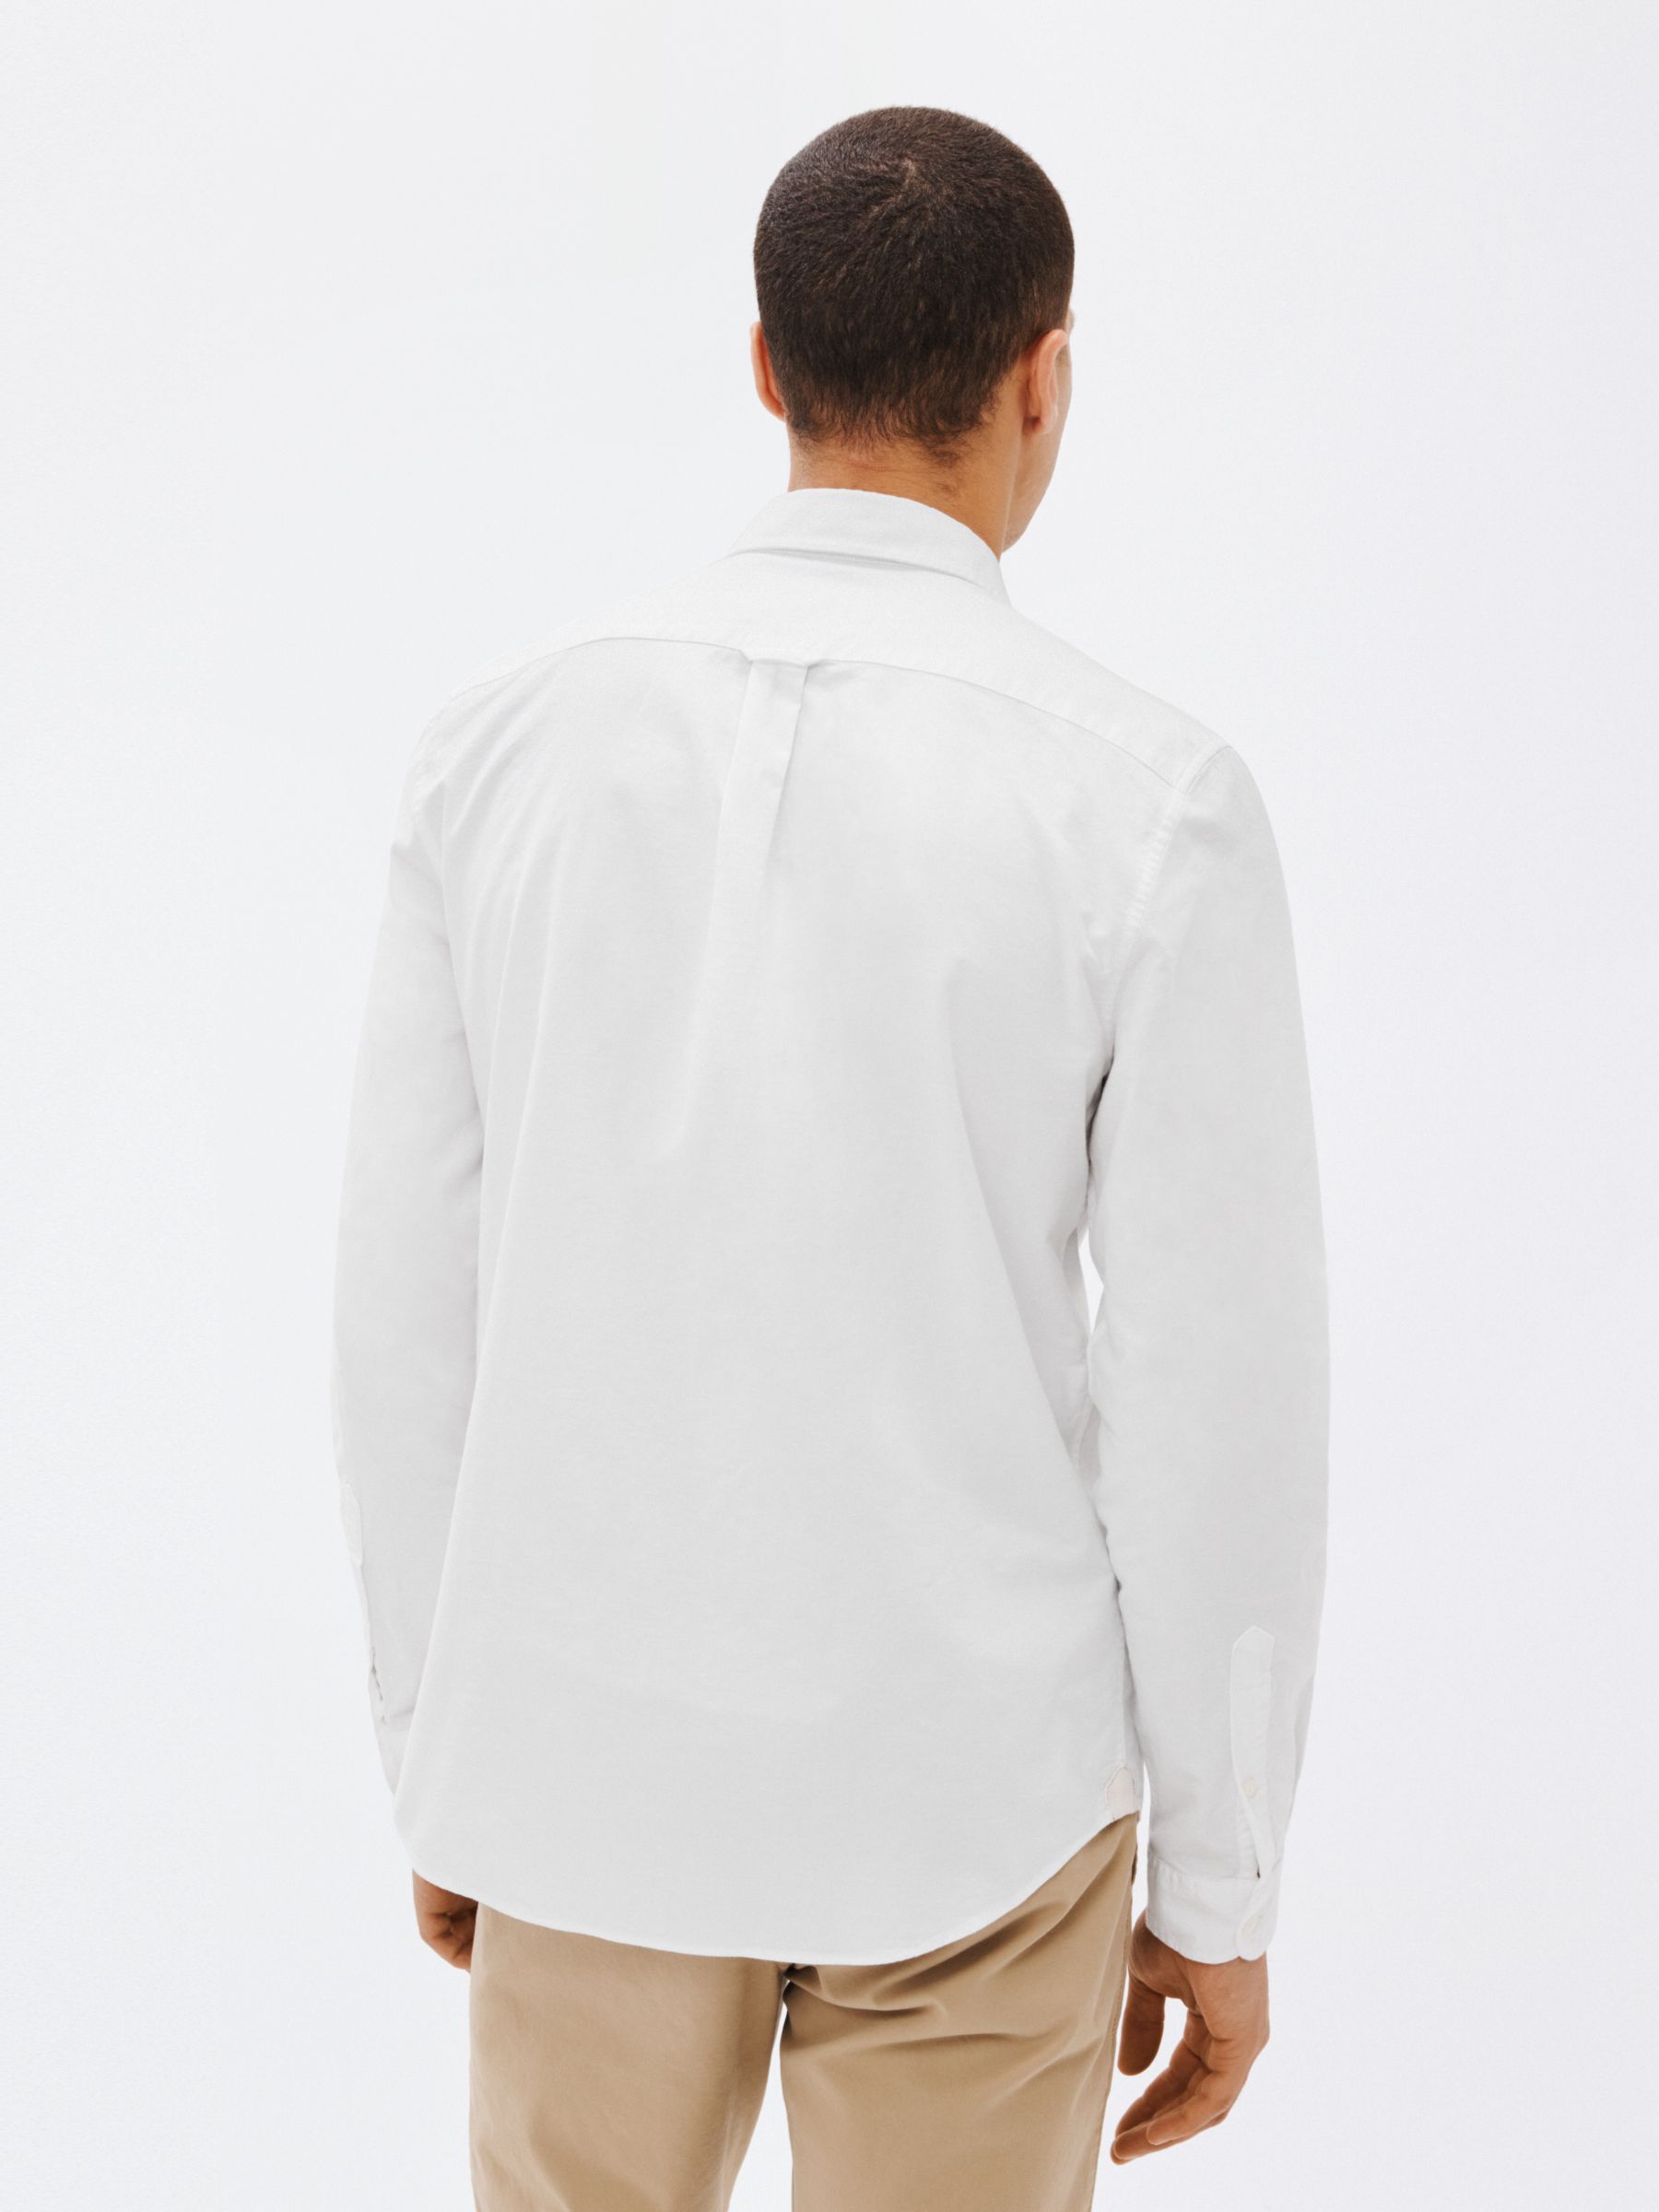 Lacoste Buttoned Collar Oxford Shirt, C001 at John Lewis & Partners